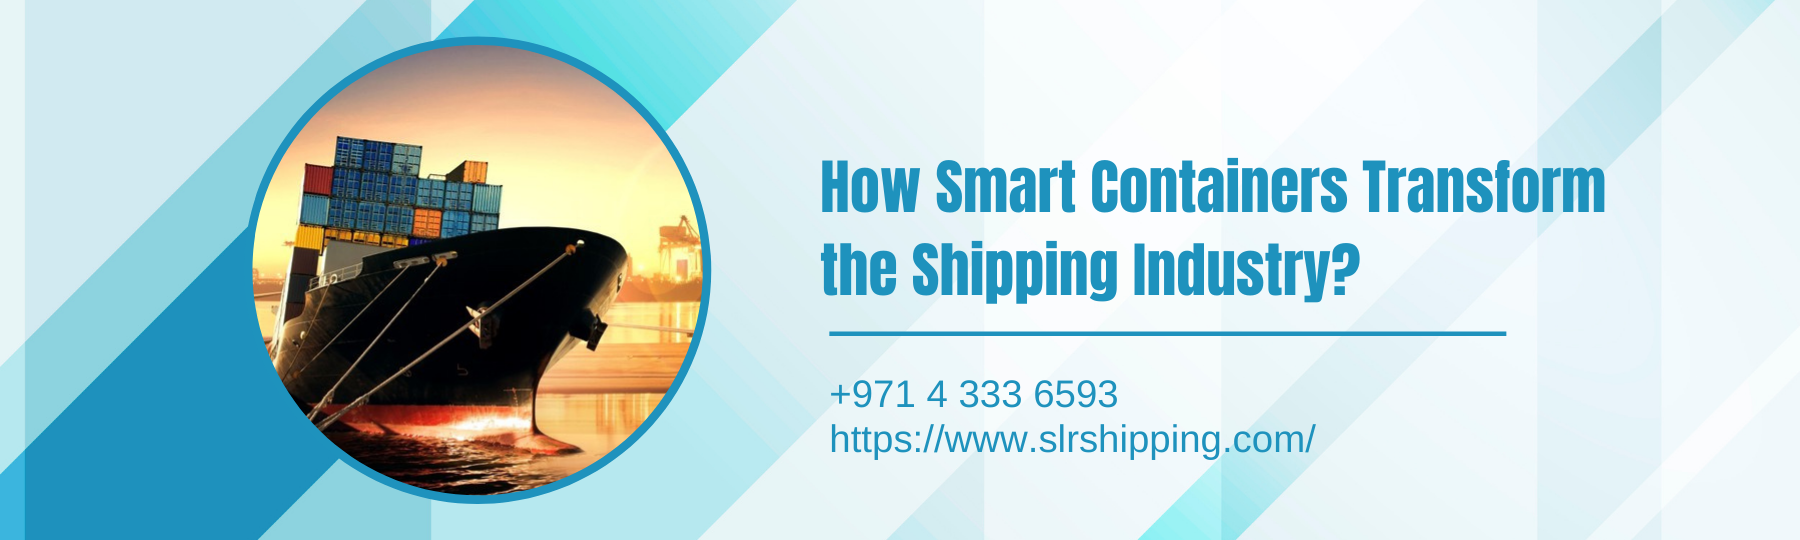 How the  Shipping Industry Benefits from Smart Containers?